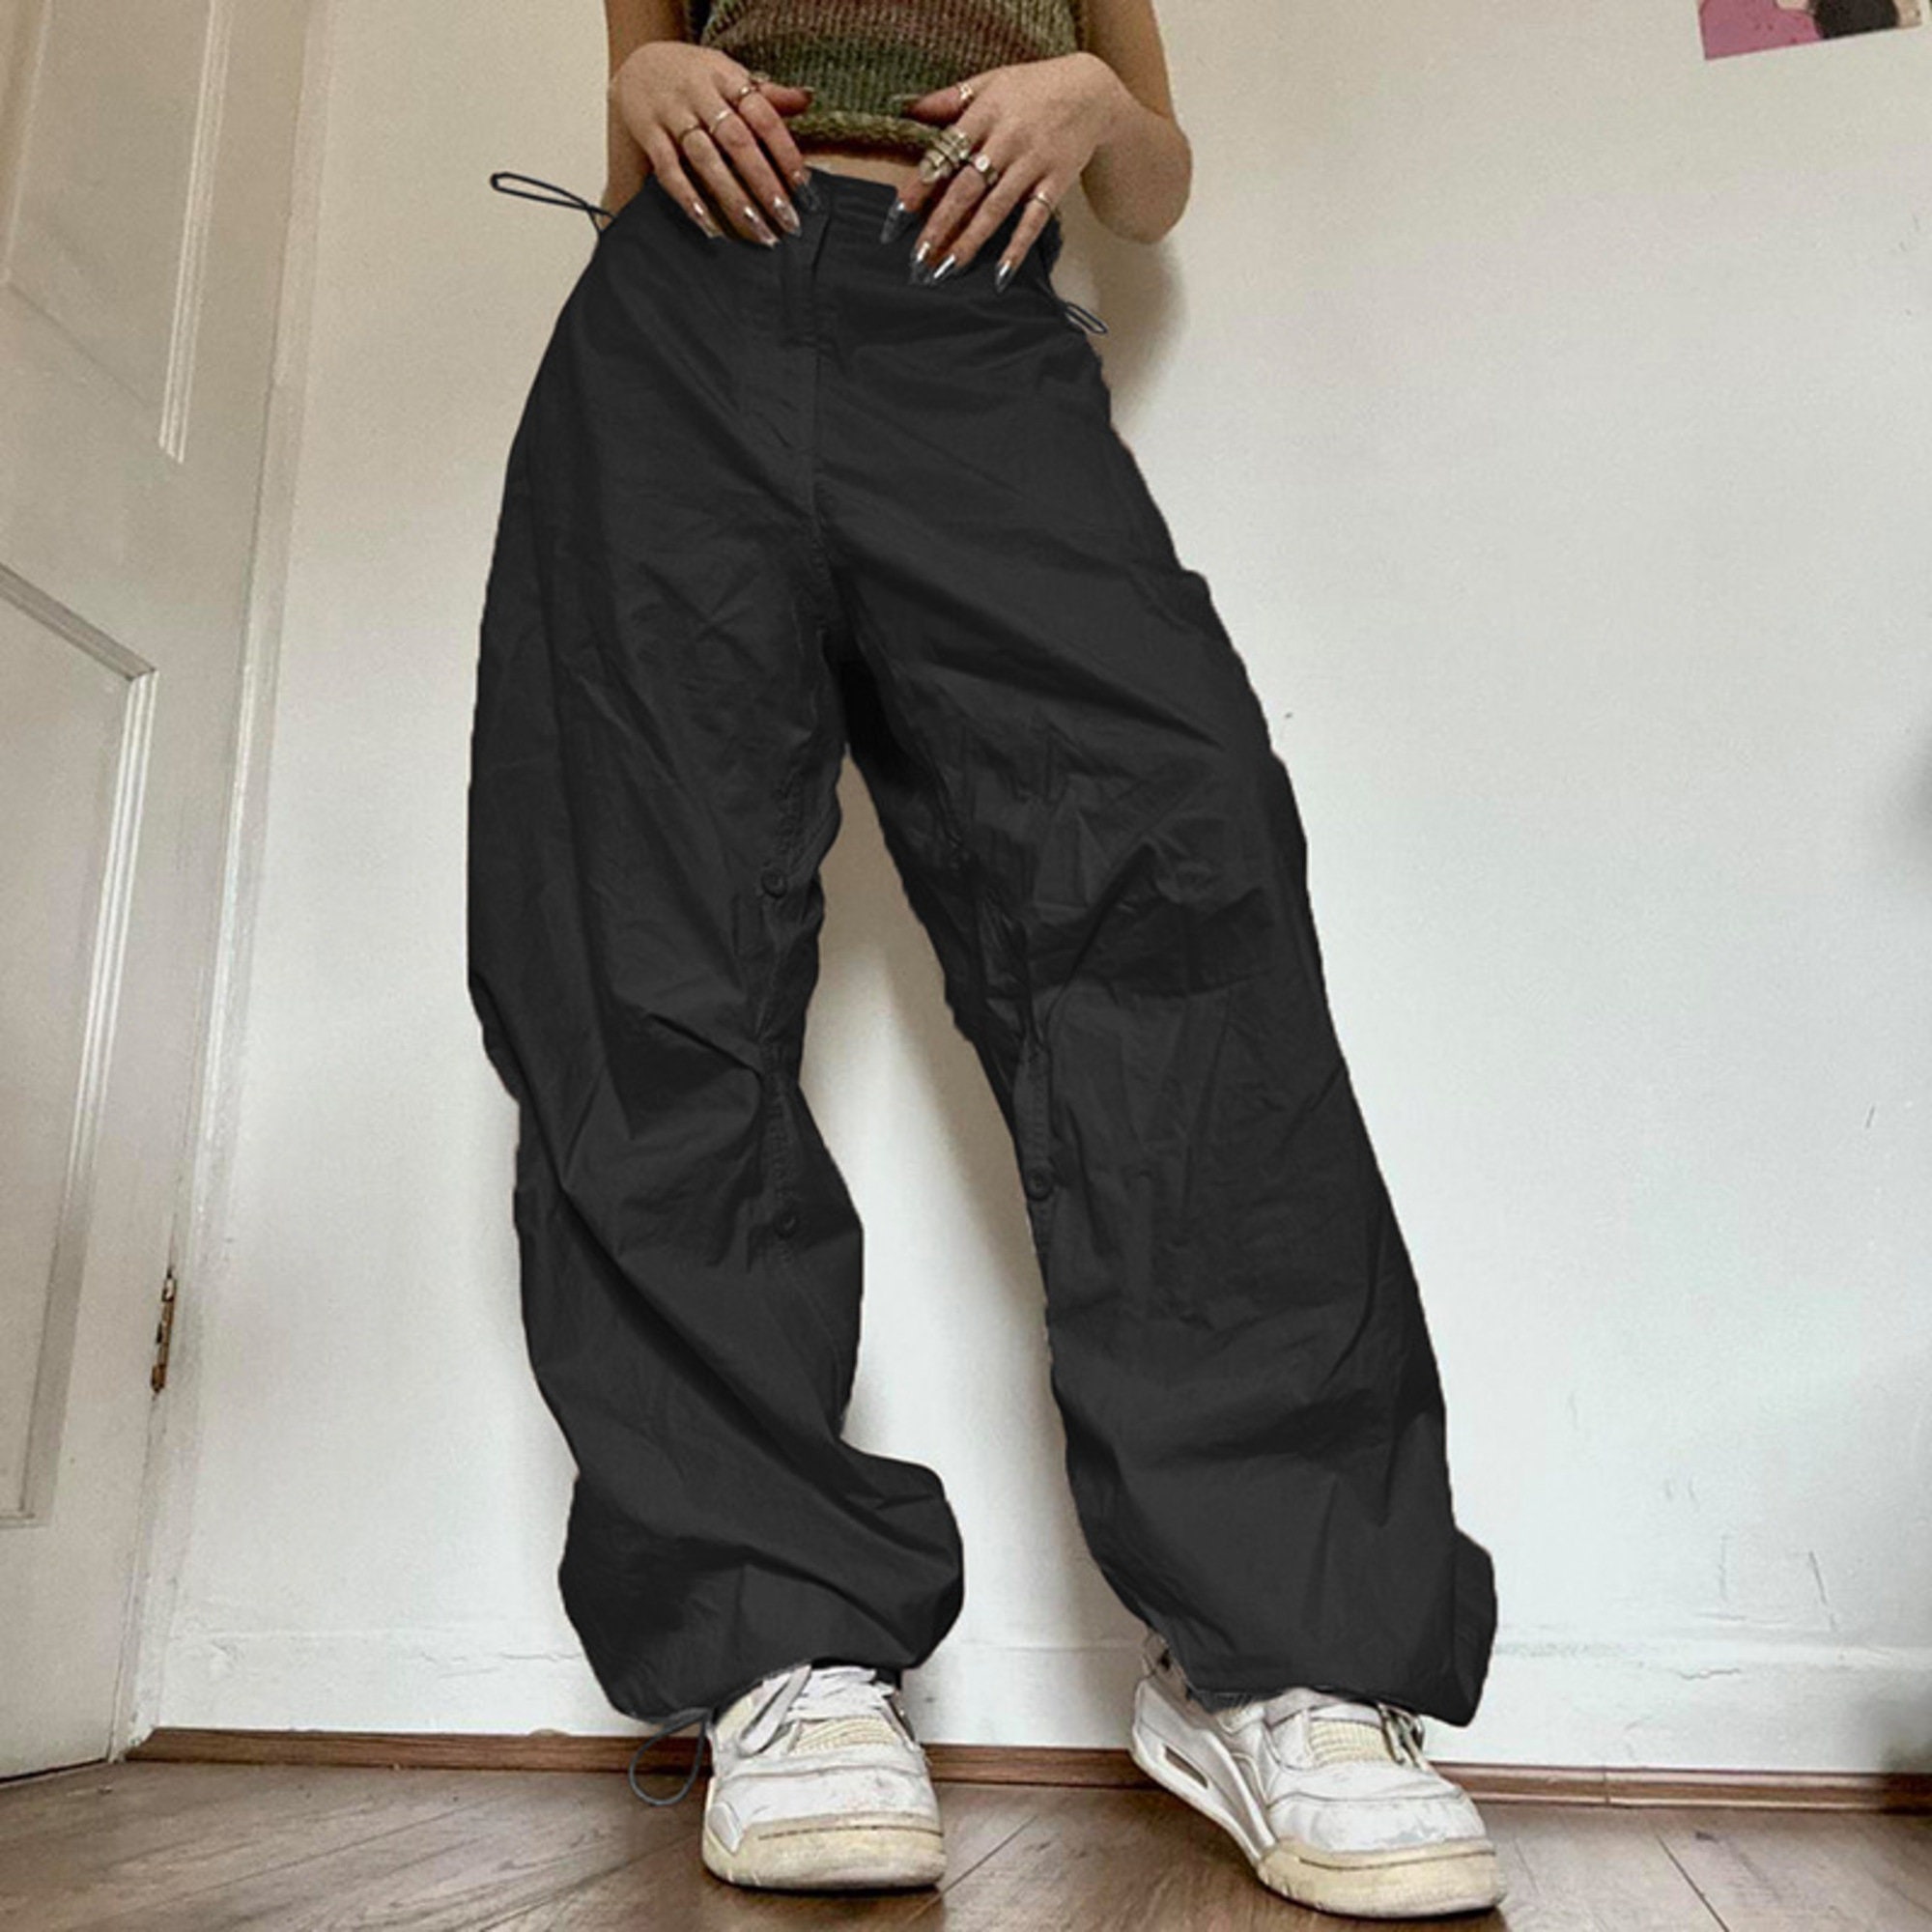 Women Casual Baggy Wide Leg Sweatpants Fashion Vintage Chic Solid Drawstring Trousers Y2k Loose Streetwear Joggers Cargo Pants